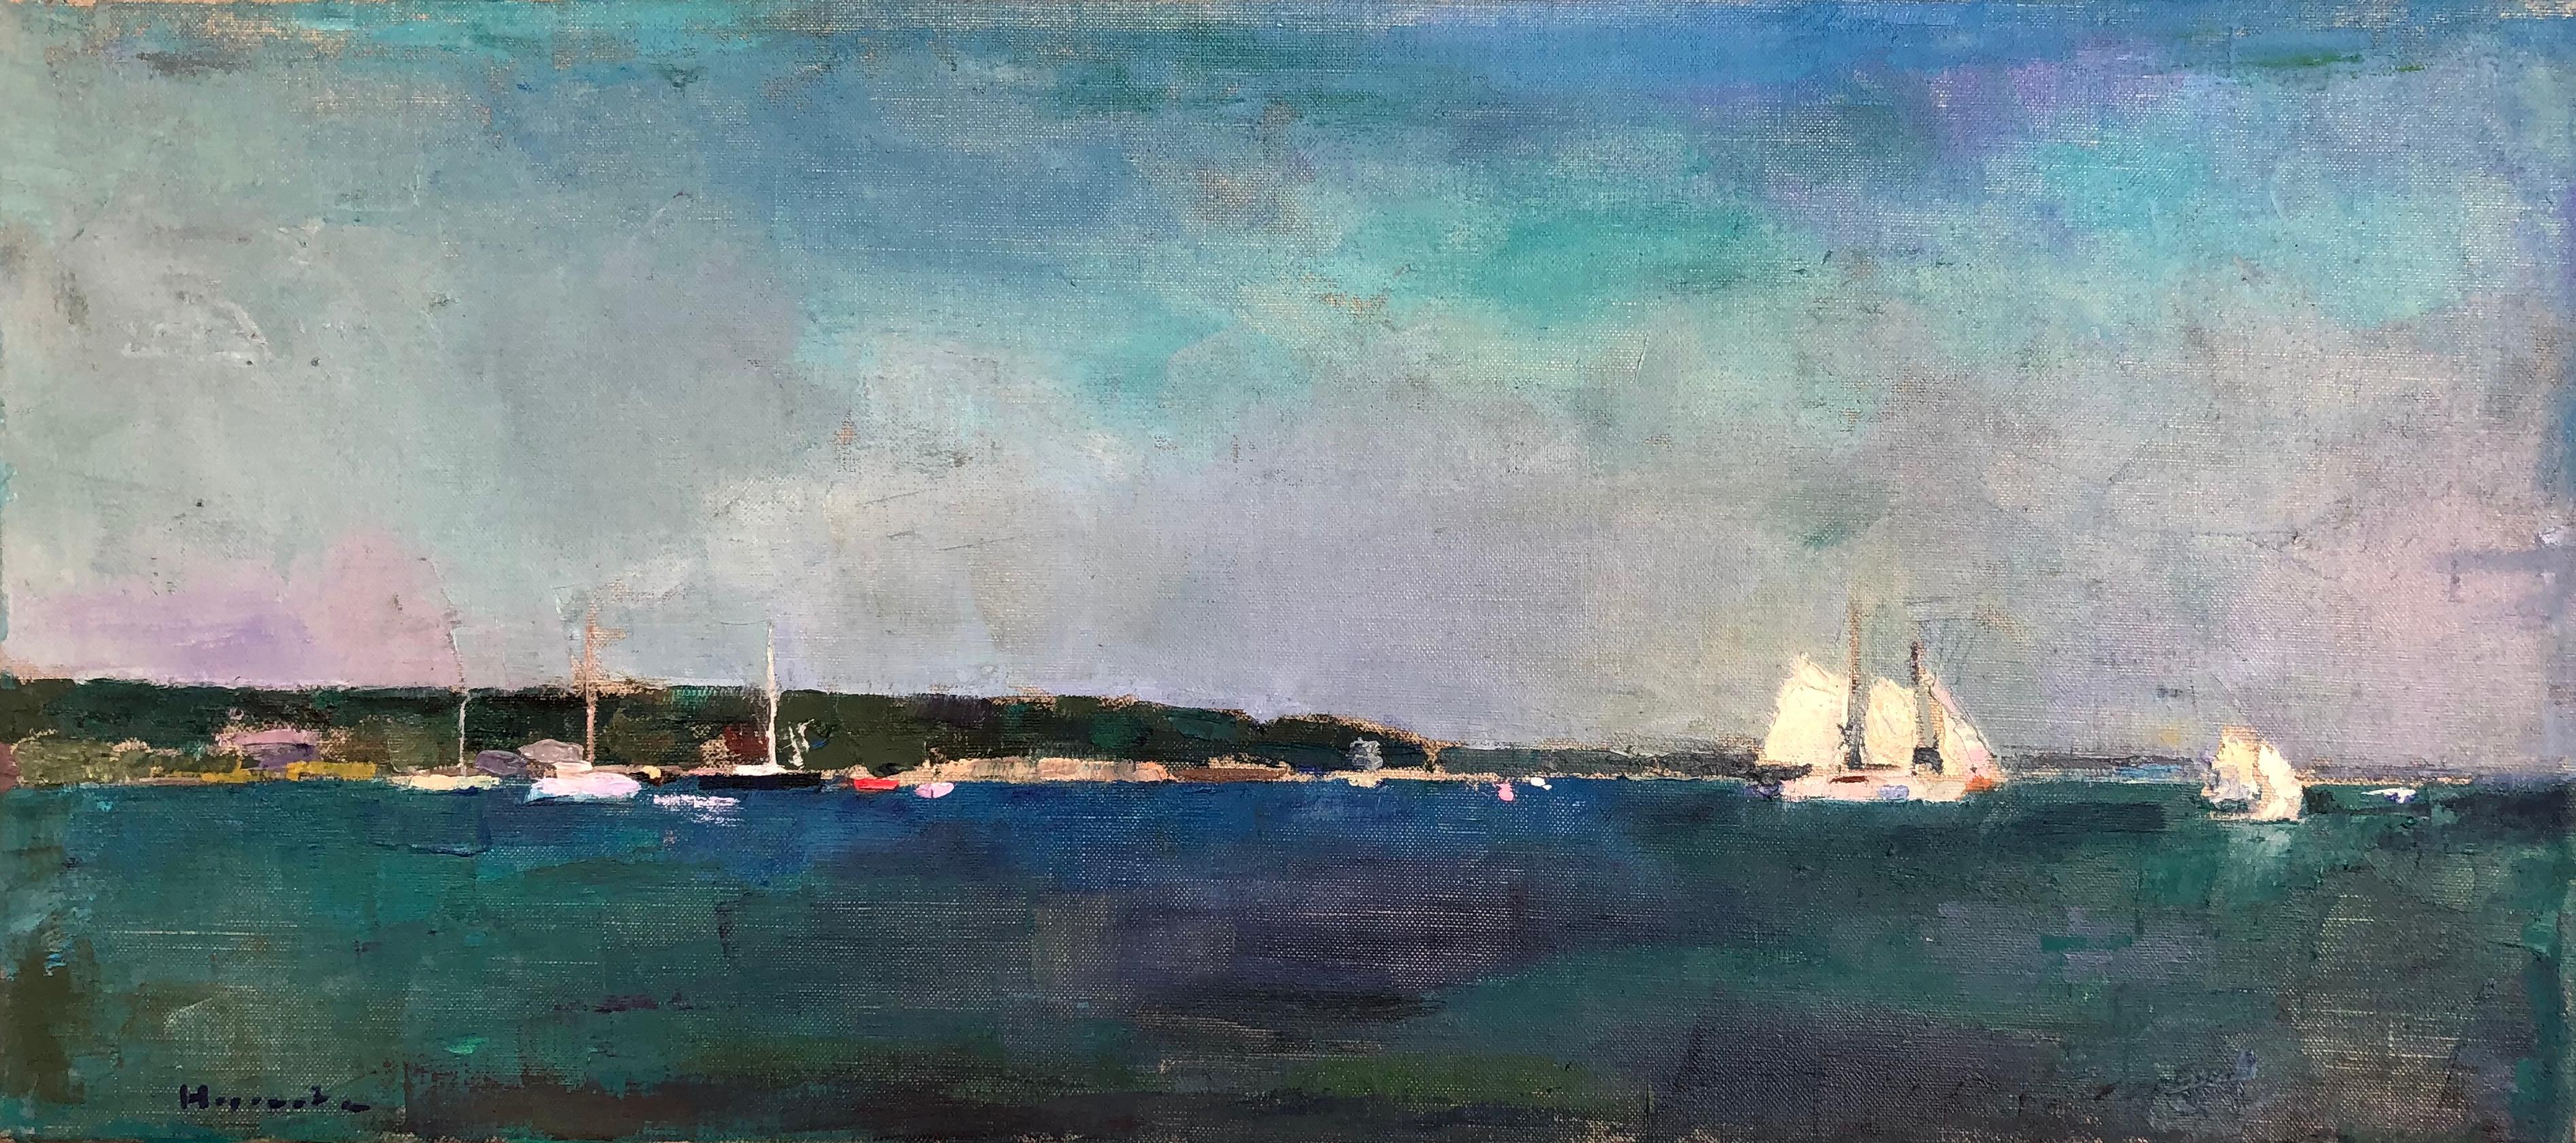 Larry Horowitz Figurative Painting - "Sailing Off Vineyard Haven" oil painting of sailboats in deep blue harbor